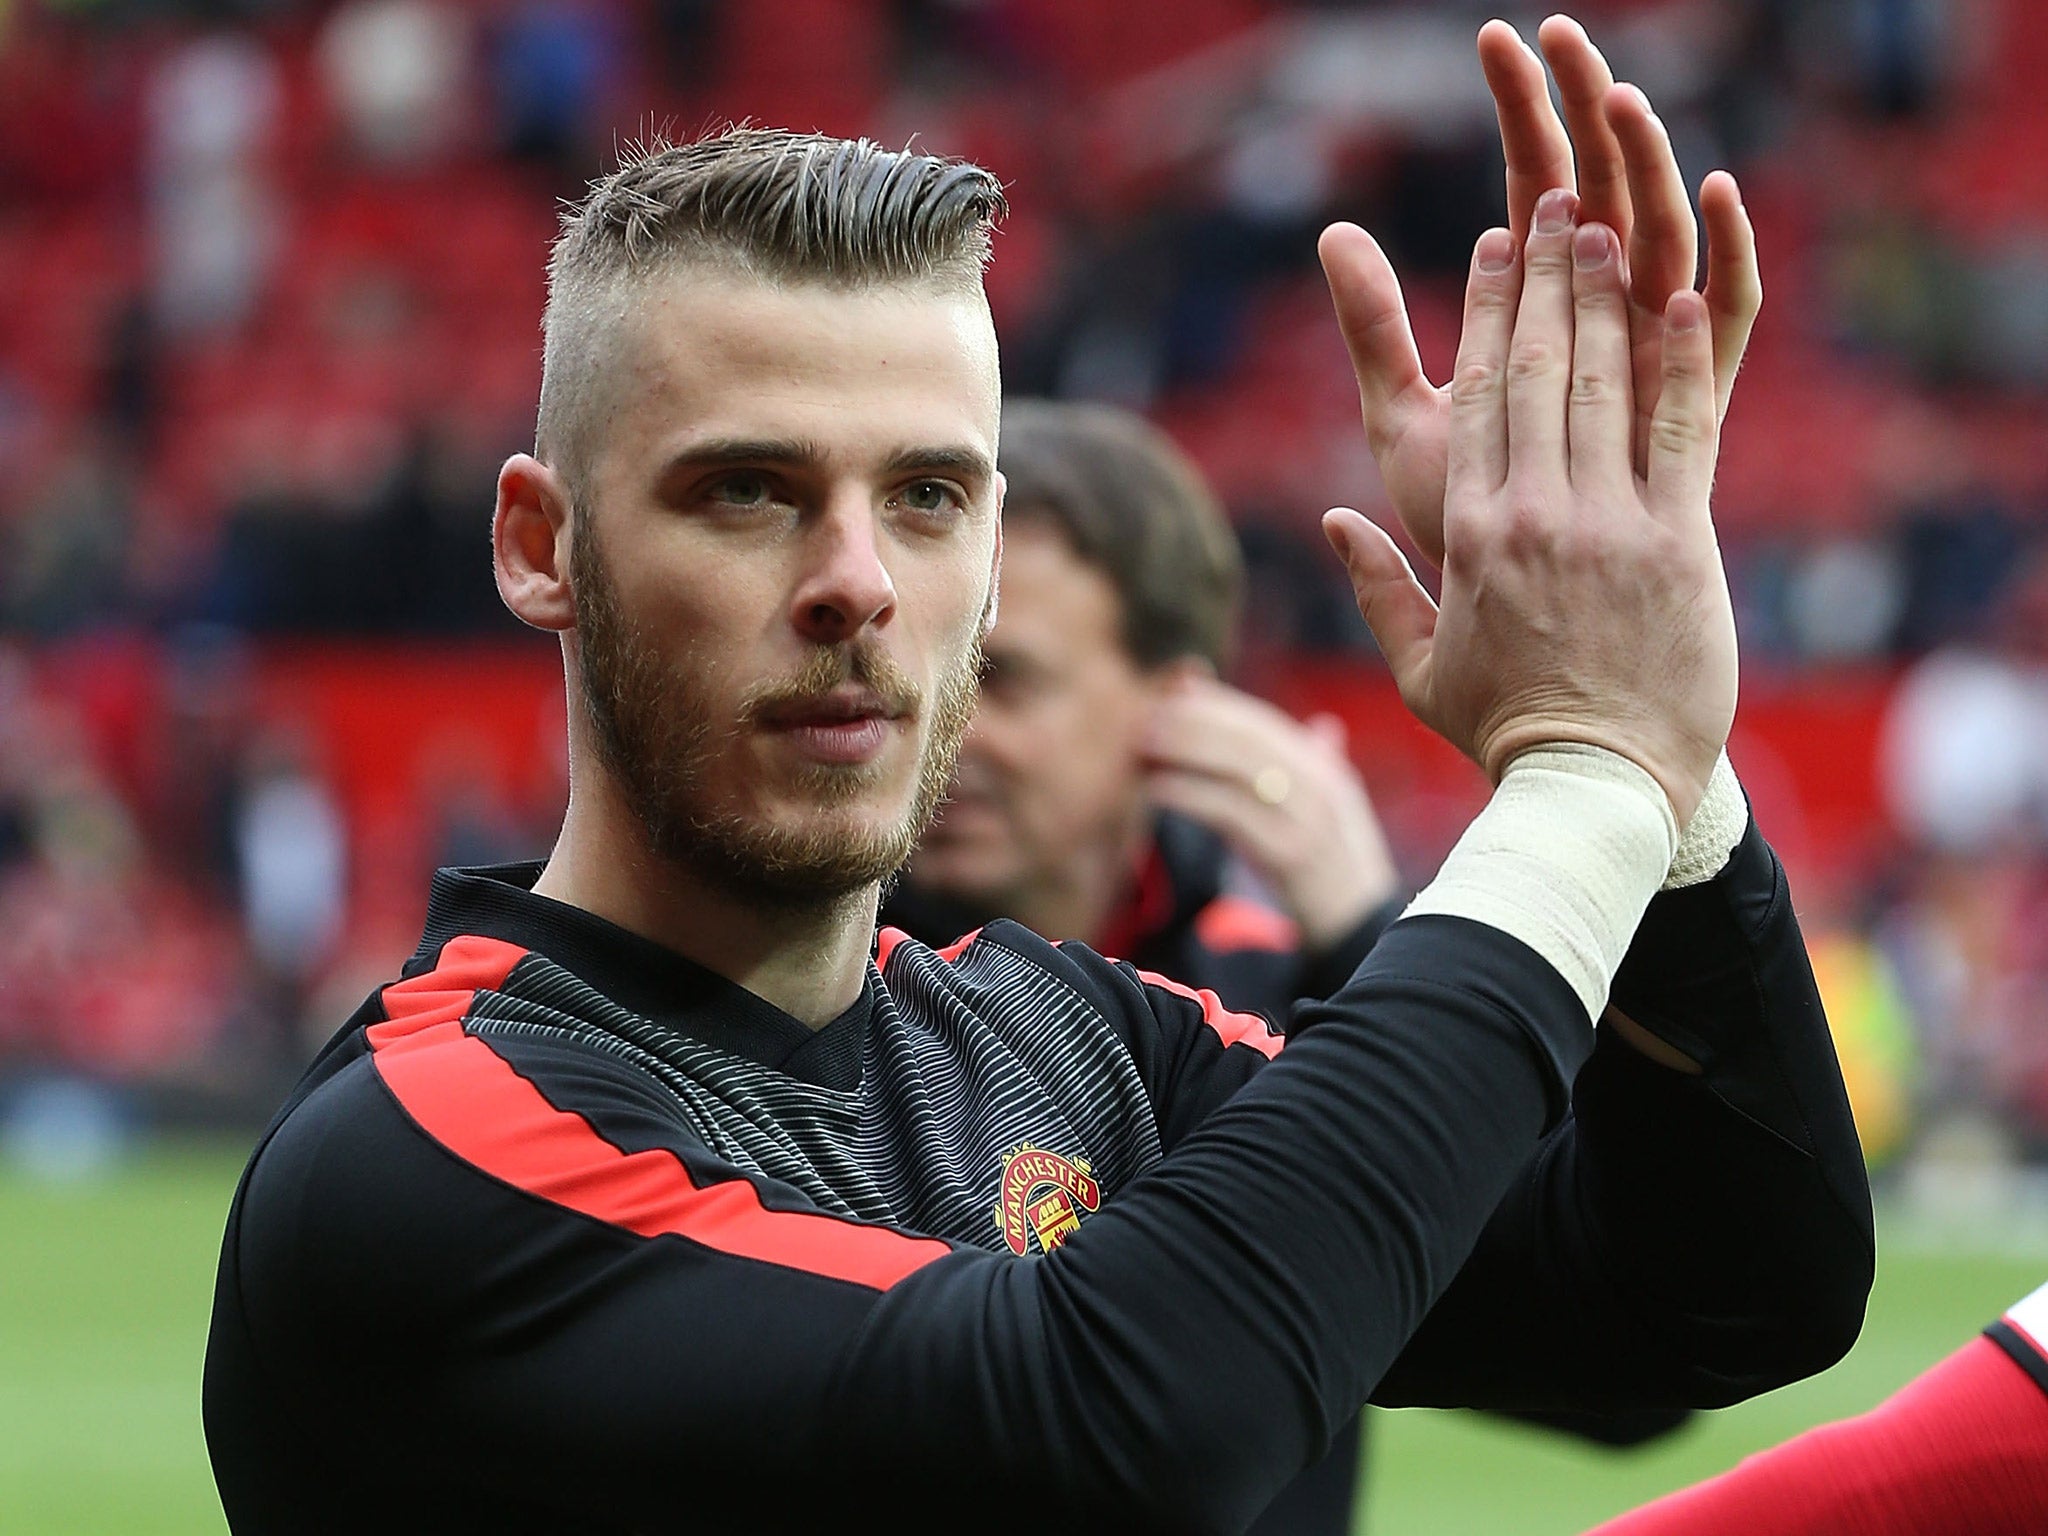 Real Madrid could bid for David De Gea in the next week